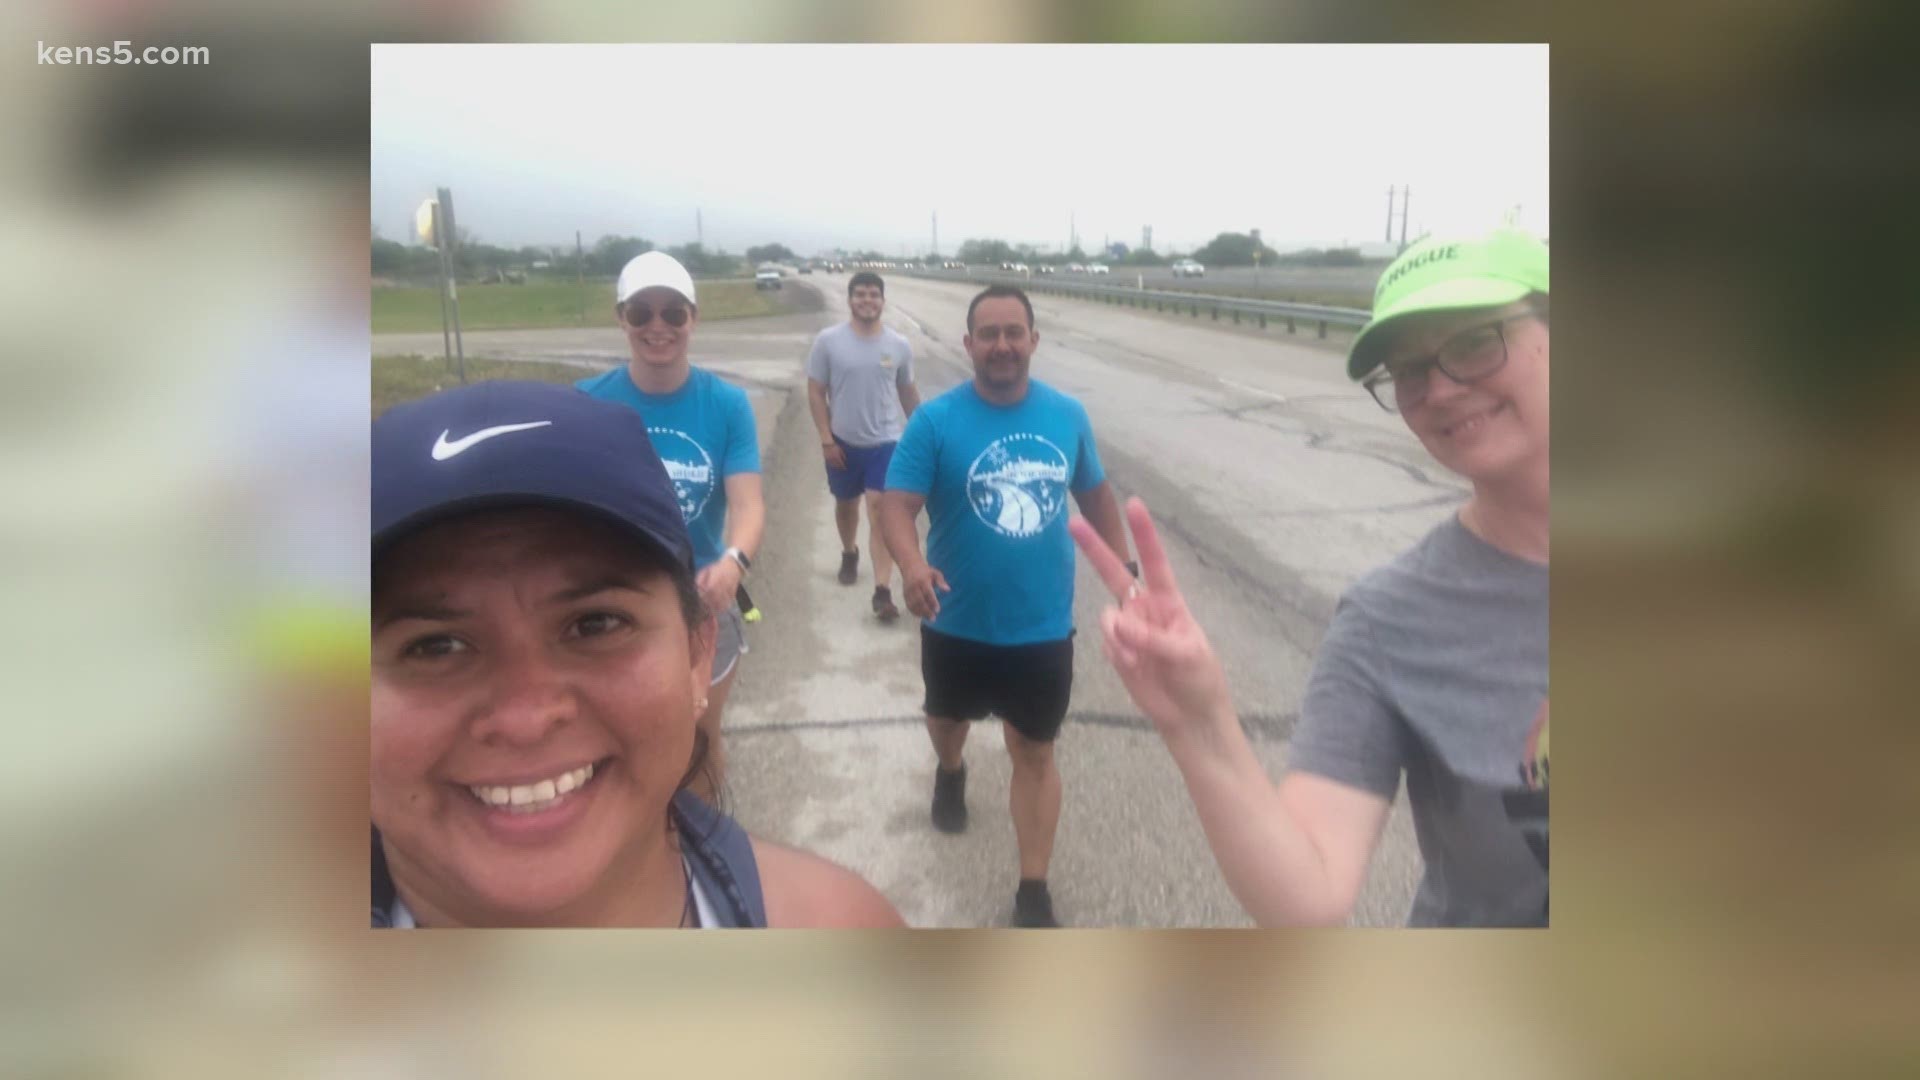 KENS 5 has been following the journey of Tina Casanova since the beginning of her training. She shares the unexpected ending to her 76 mile run.